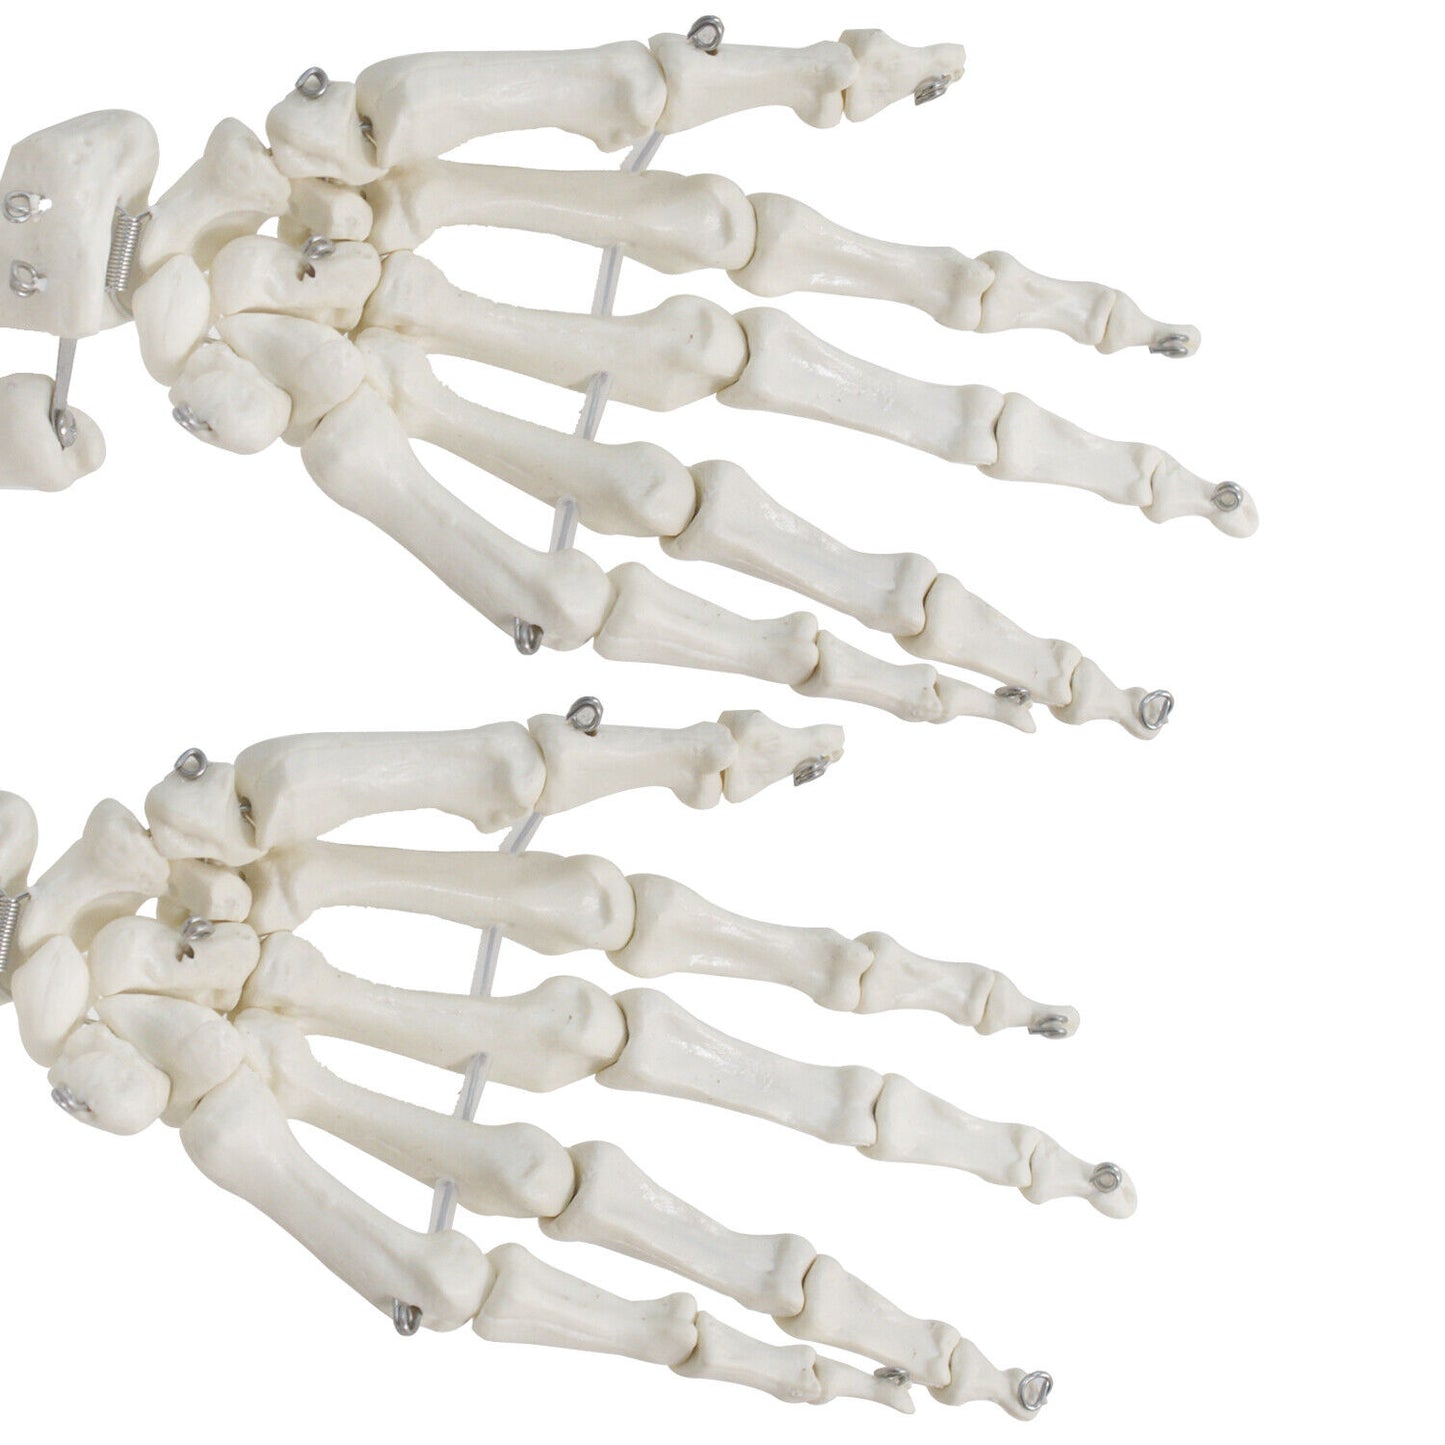 70.8" Human Skeleton Life Size Medical Model for Anatomy Study W/Rolling Stand